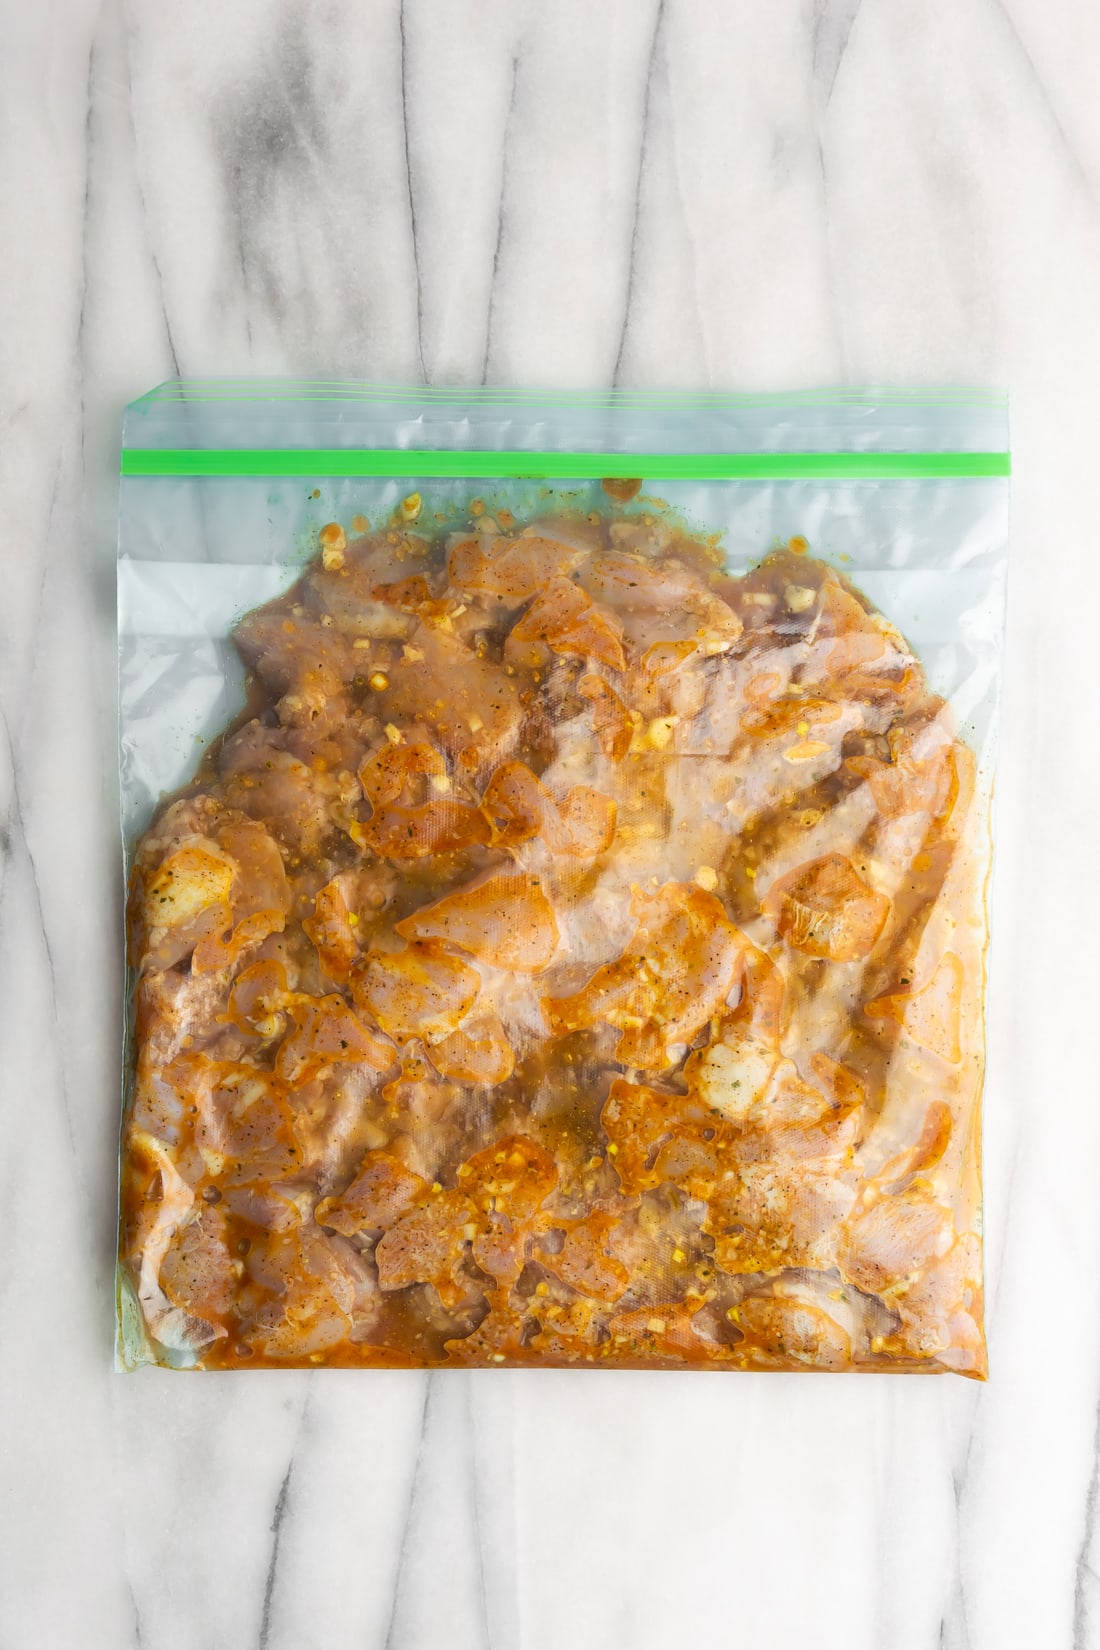 chicken chunks marinating in citrus marinade with sazon completa in a resealable bag